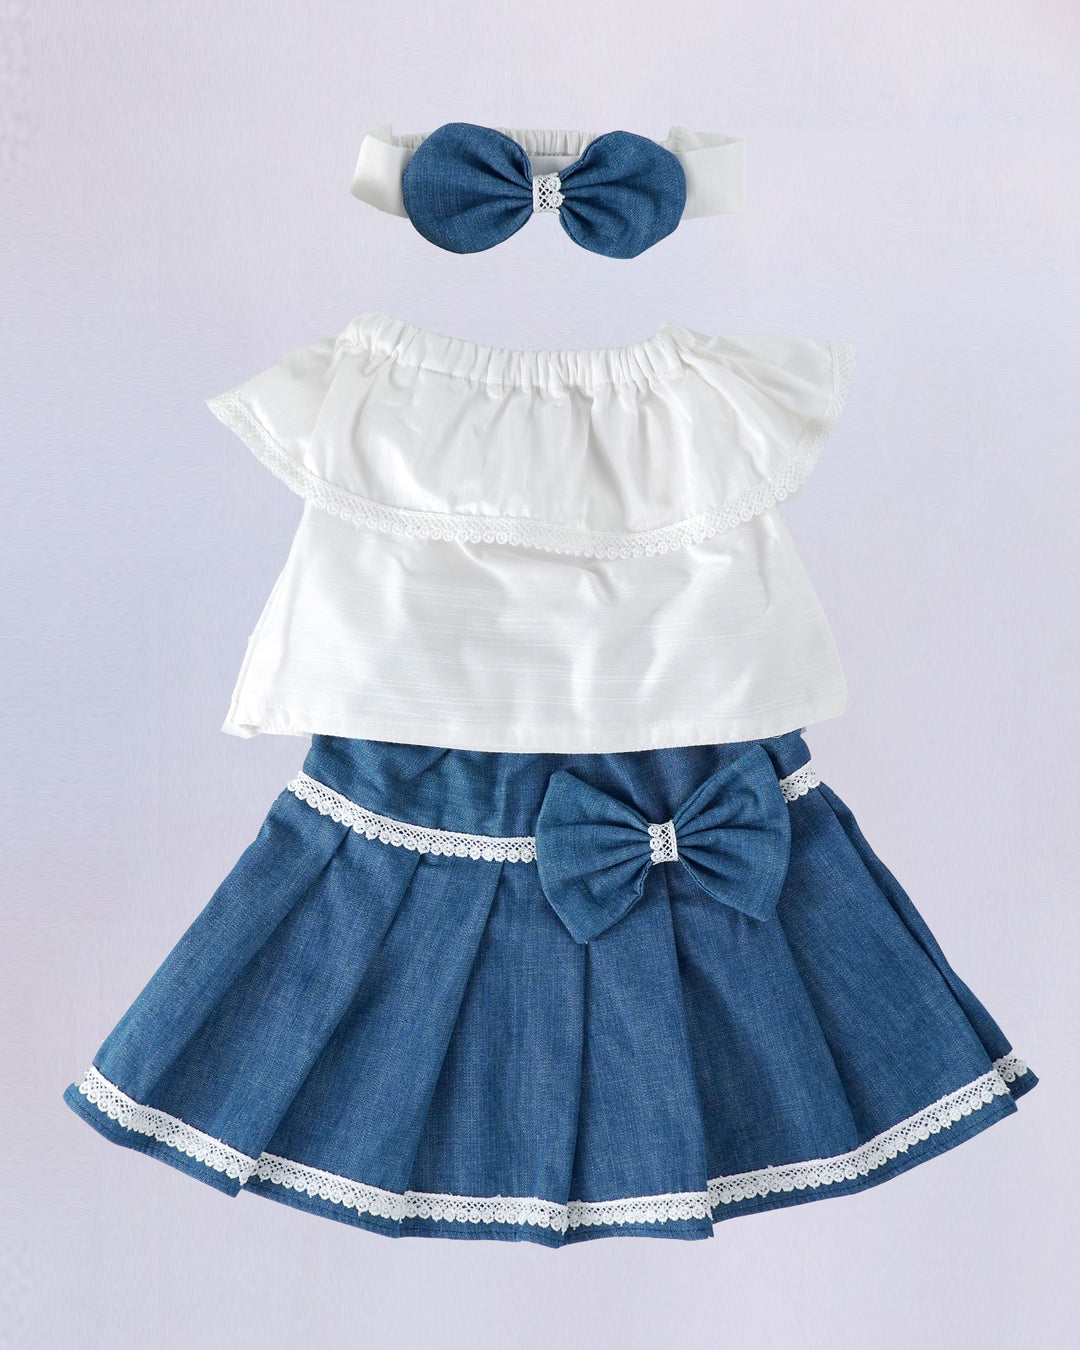 casual dresses for baby girls stanwells kids offwhite and blue shade  discount low cost dress skirt & top